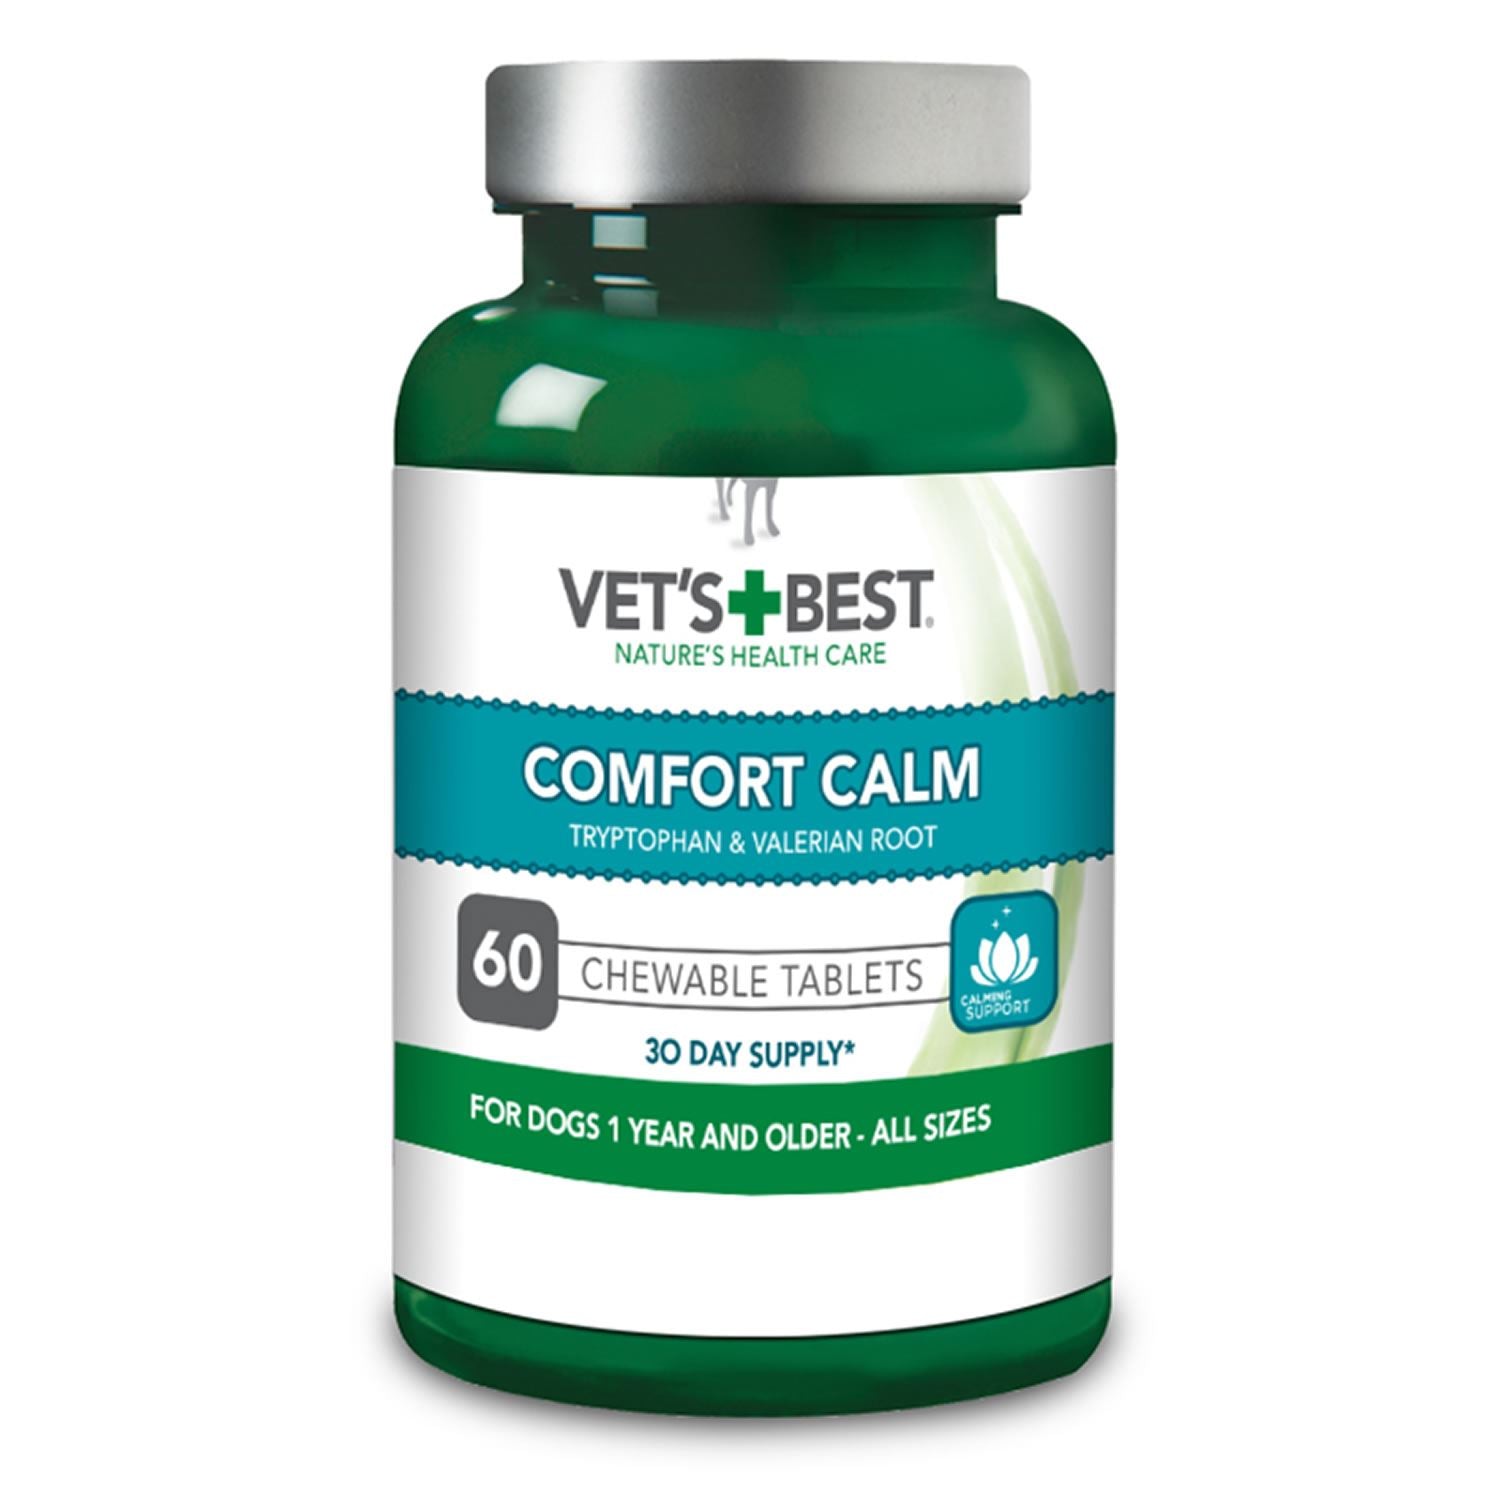 Vets Best Comfort Calm Tablets For Dogs - Just Horse Riders